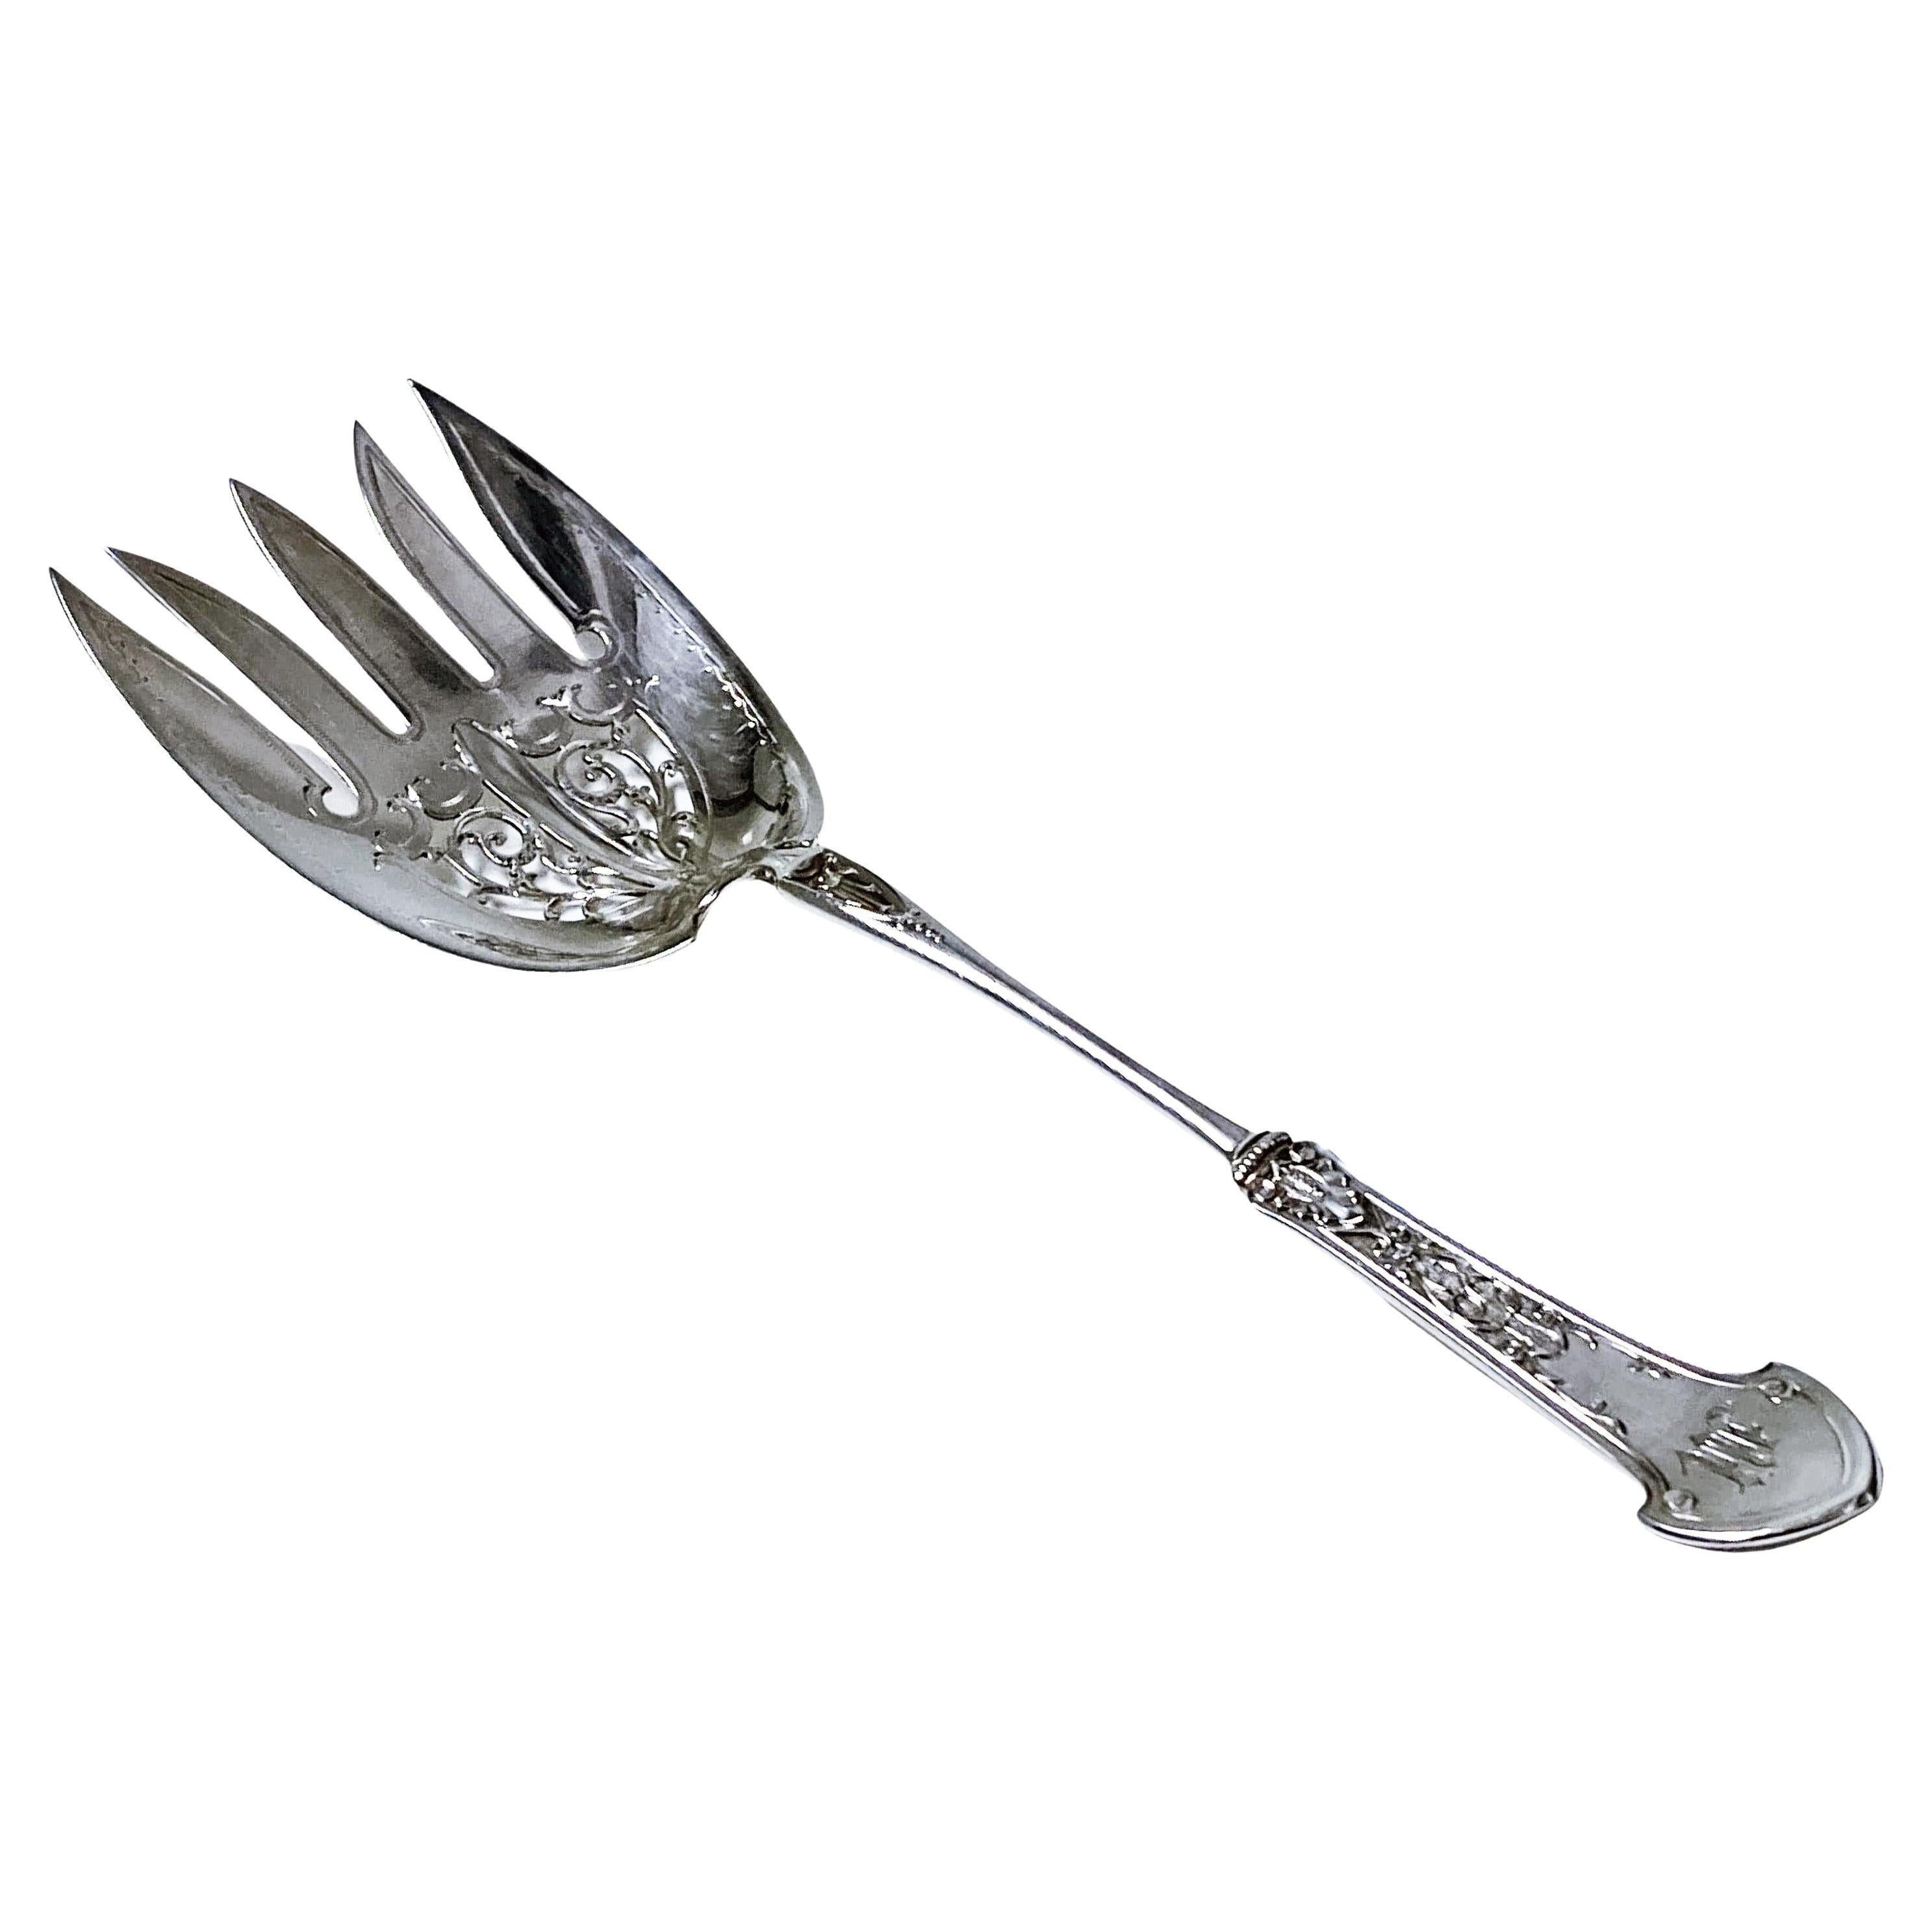 Gorham Sterling Corinthian pattern large Serving Fork 1871. Full Gorham sterling marks. Monogram possibly M. Length: 9.5 inches. Width of tines: 3 inches. Item Weight: 85.42 grams. Very good condition